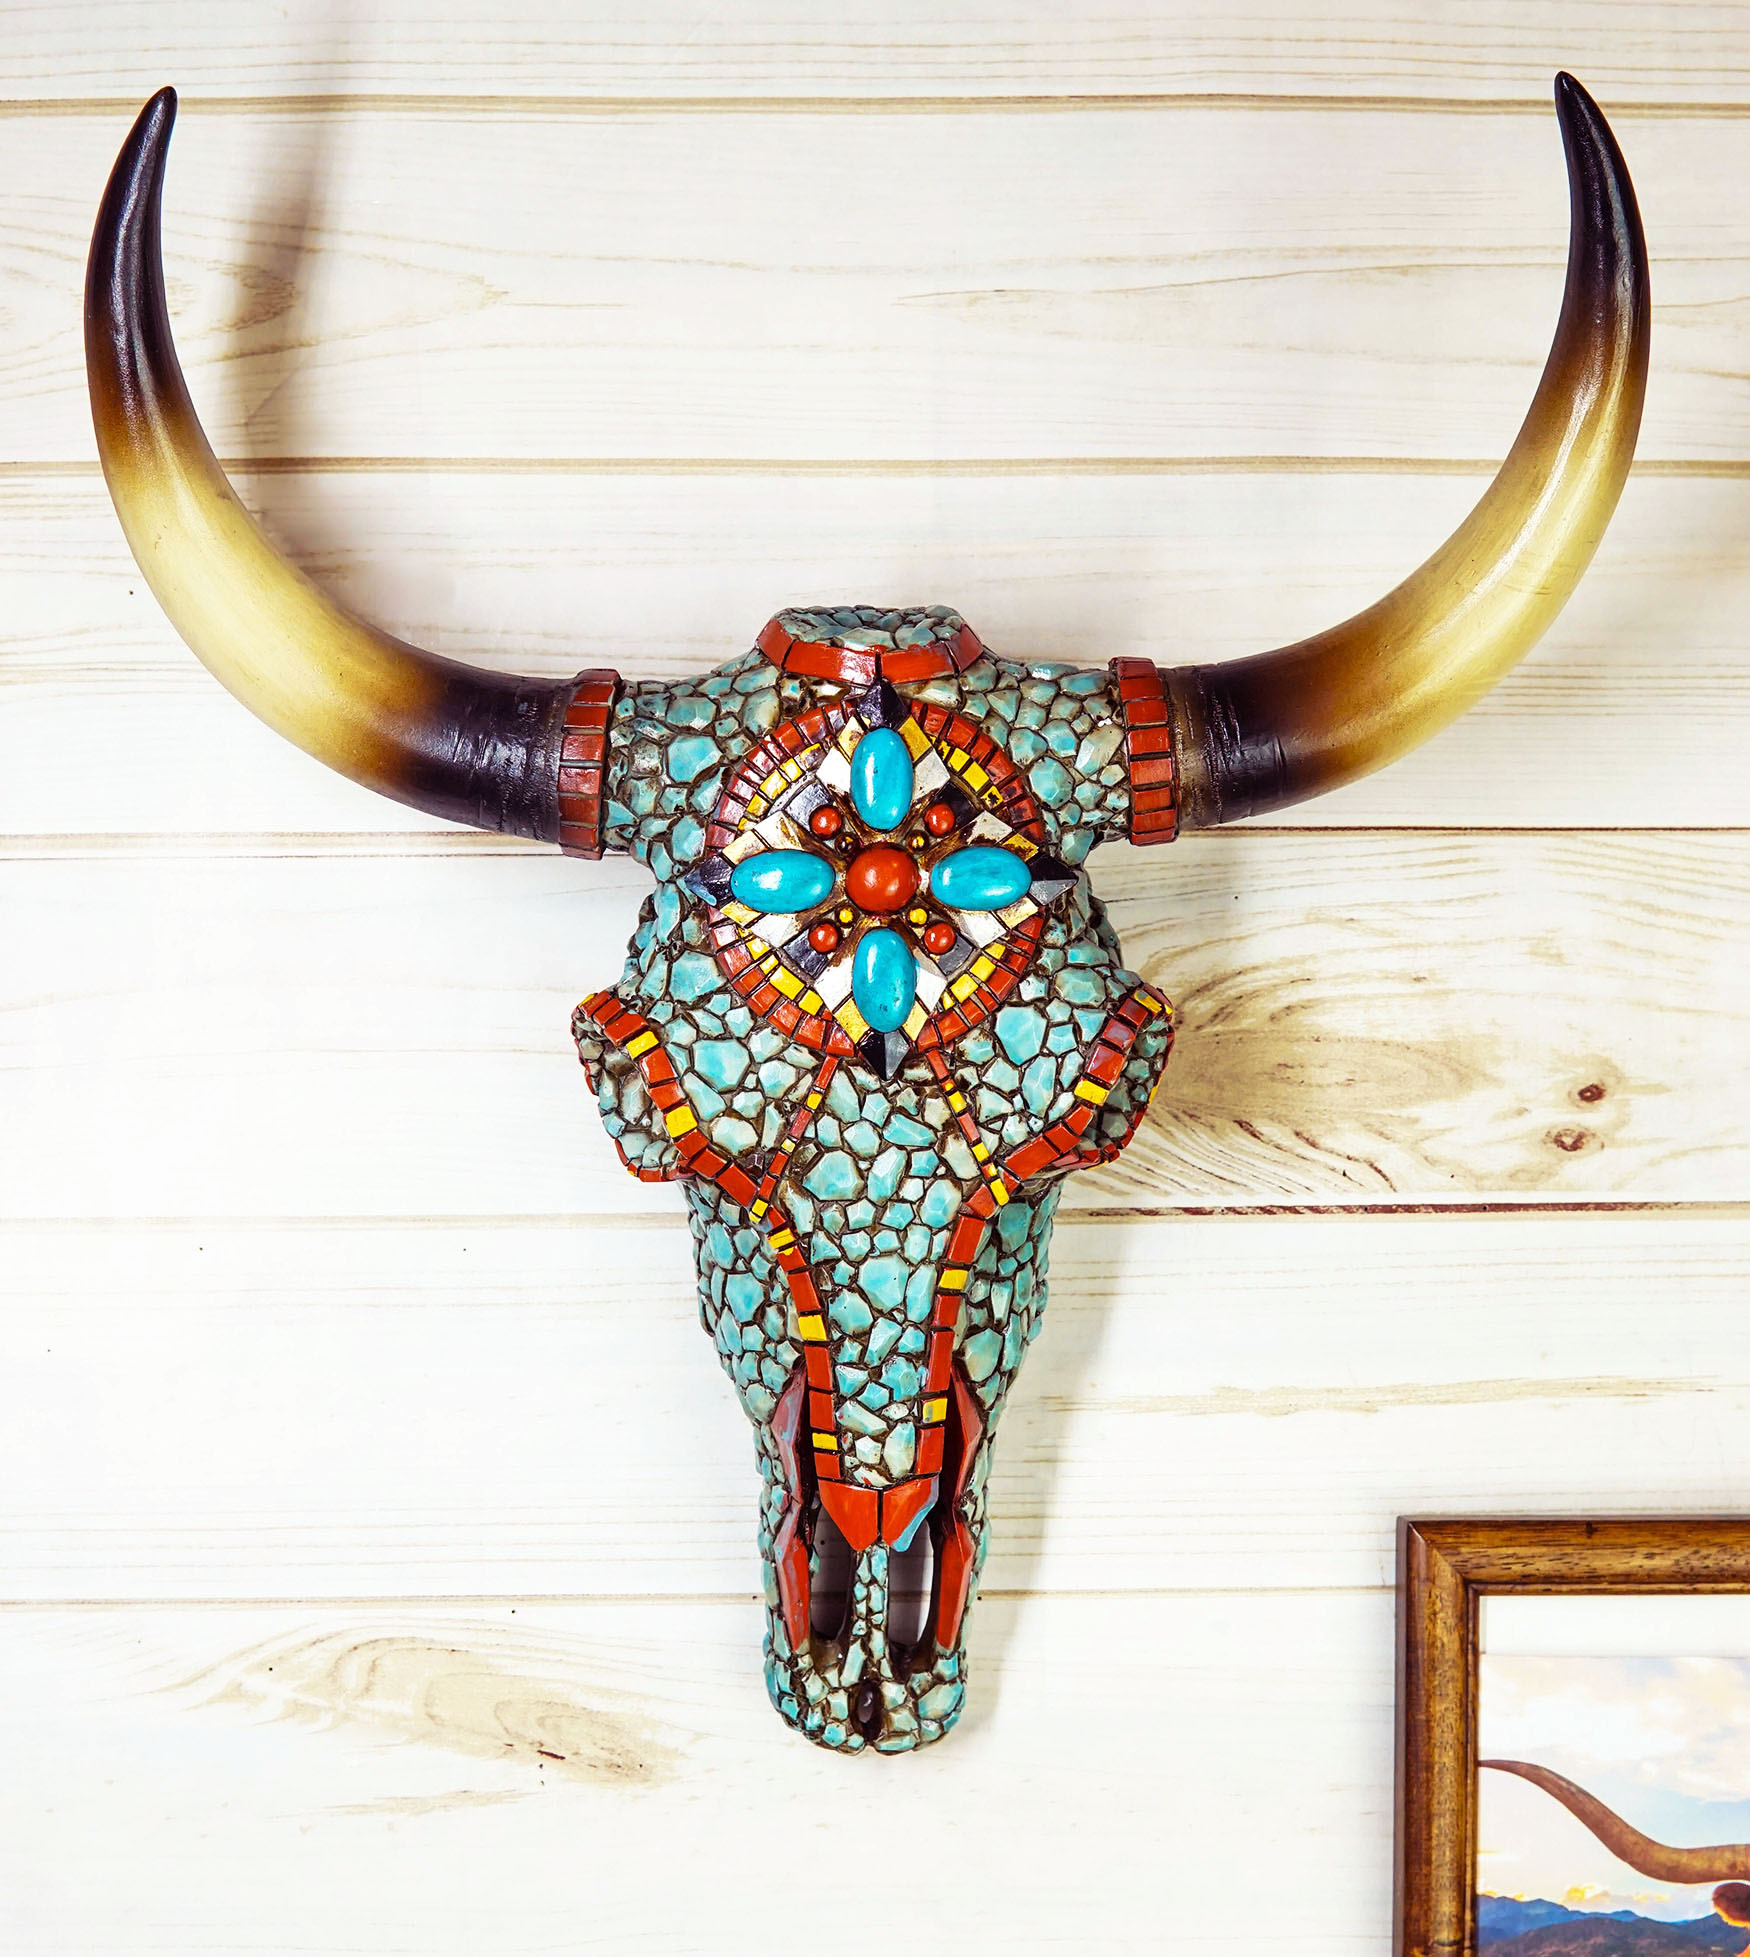 Large Western Steer Cow Skull With Mosaic Turquoise Stones And Beads Wall Decor - image 5 of 6